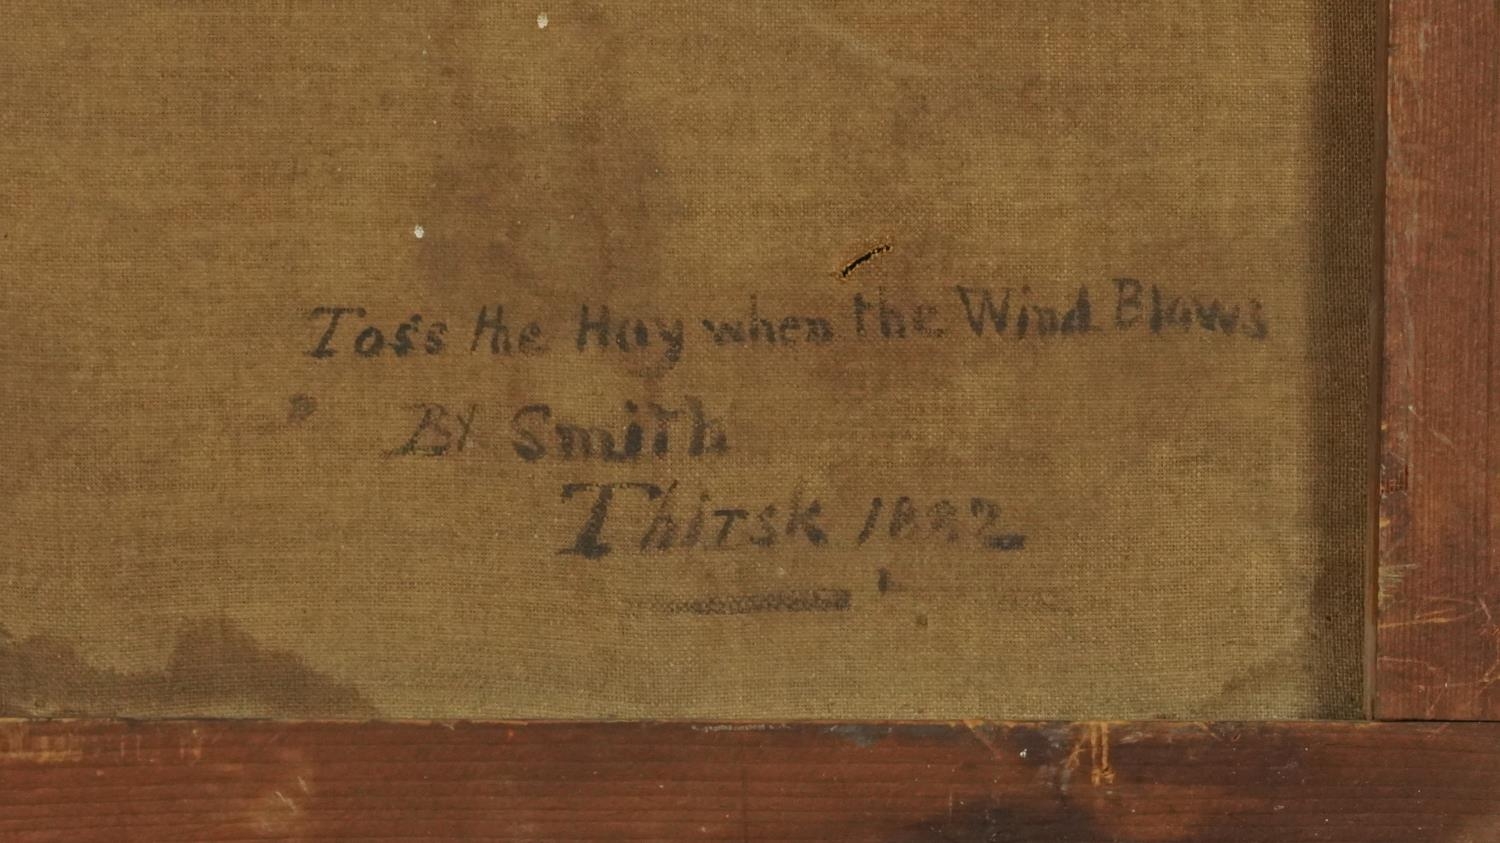 Smith - Toss the Hay When the Wind Blows, Thirsk, 19th century Irish school oil on canvas, inscribed - Image 5 of 5